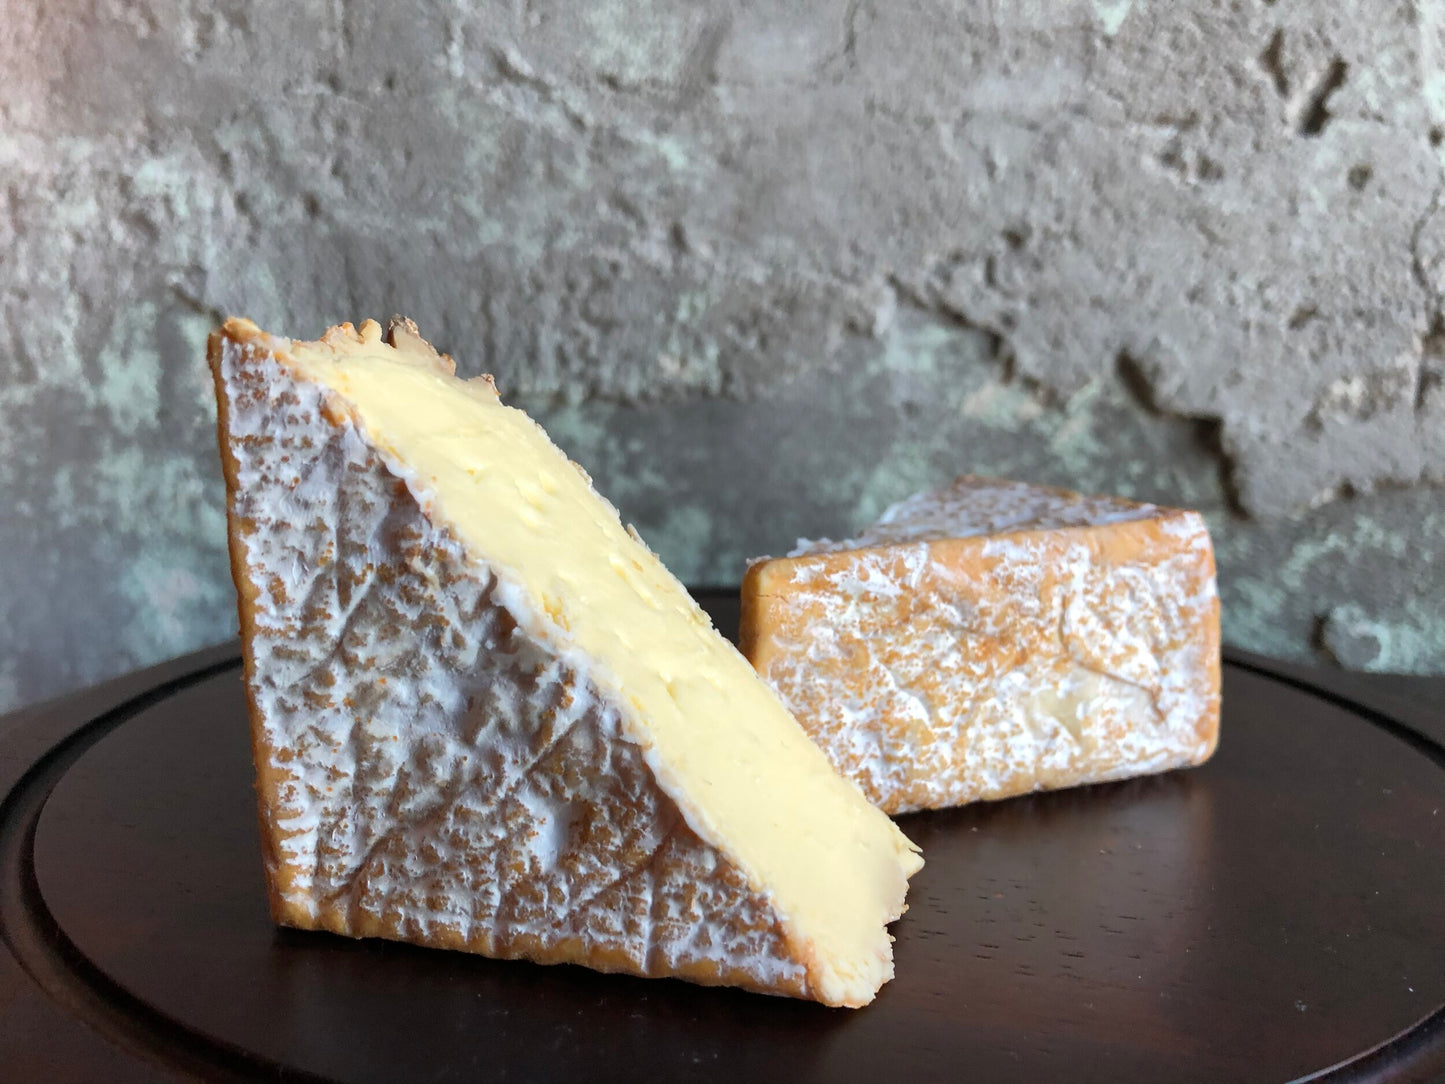 Package of Good Thunder cheese from Alemar Cheese Company